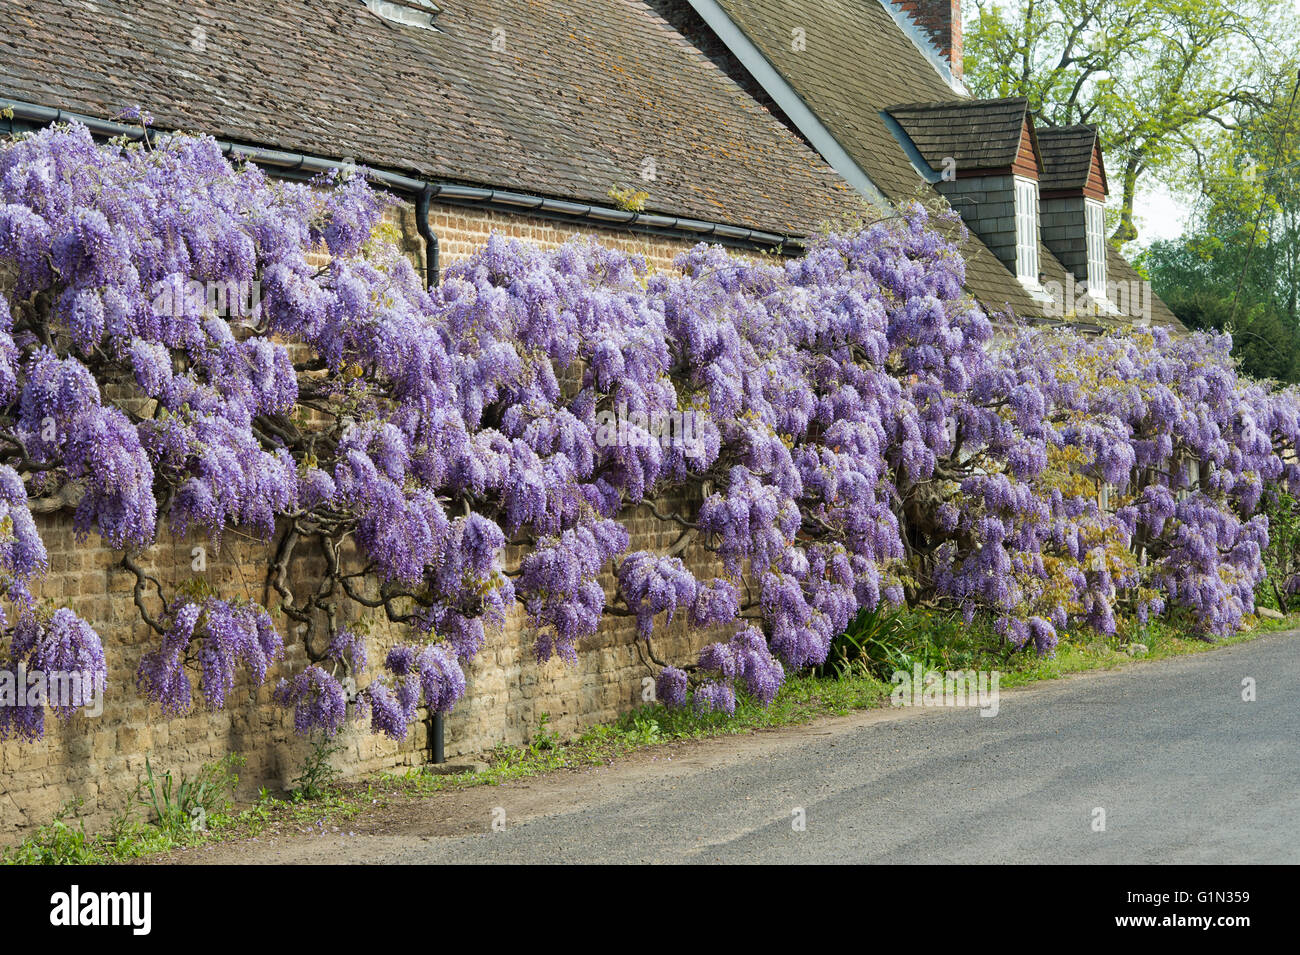 Wisteria covering the front of Wisteria cottage in Shillingford, Oxfordshire, England Stock Photo